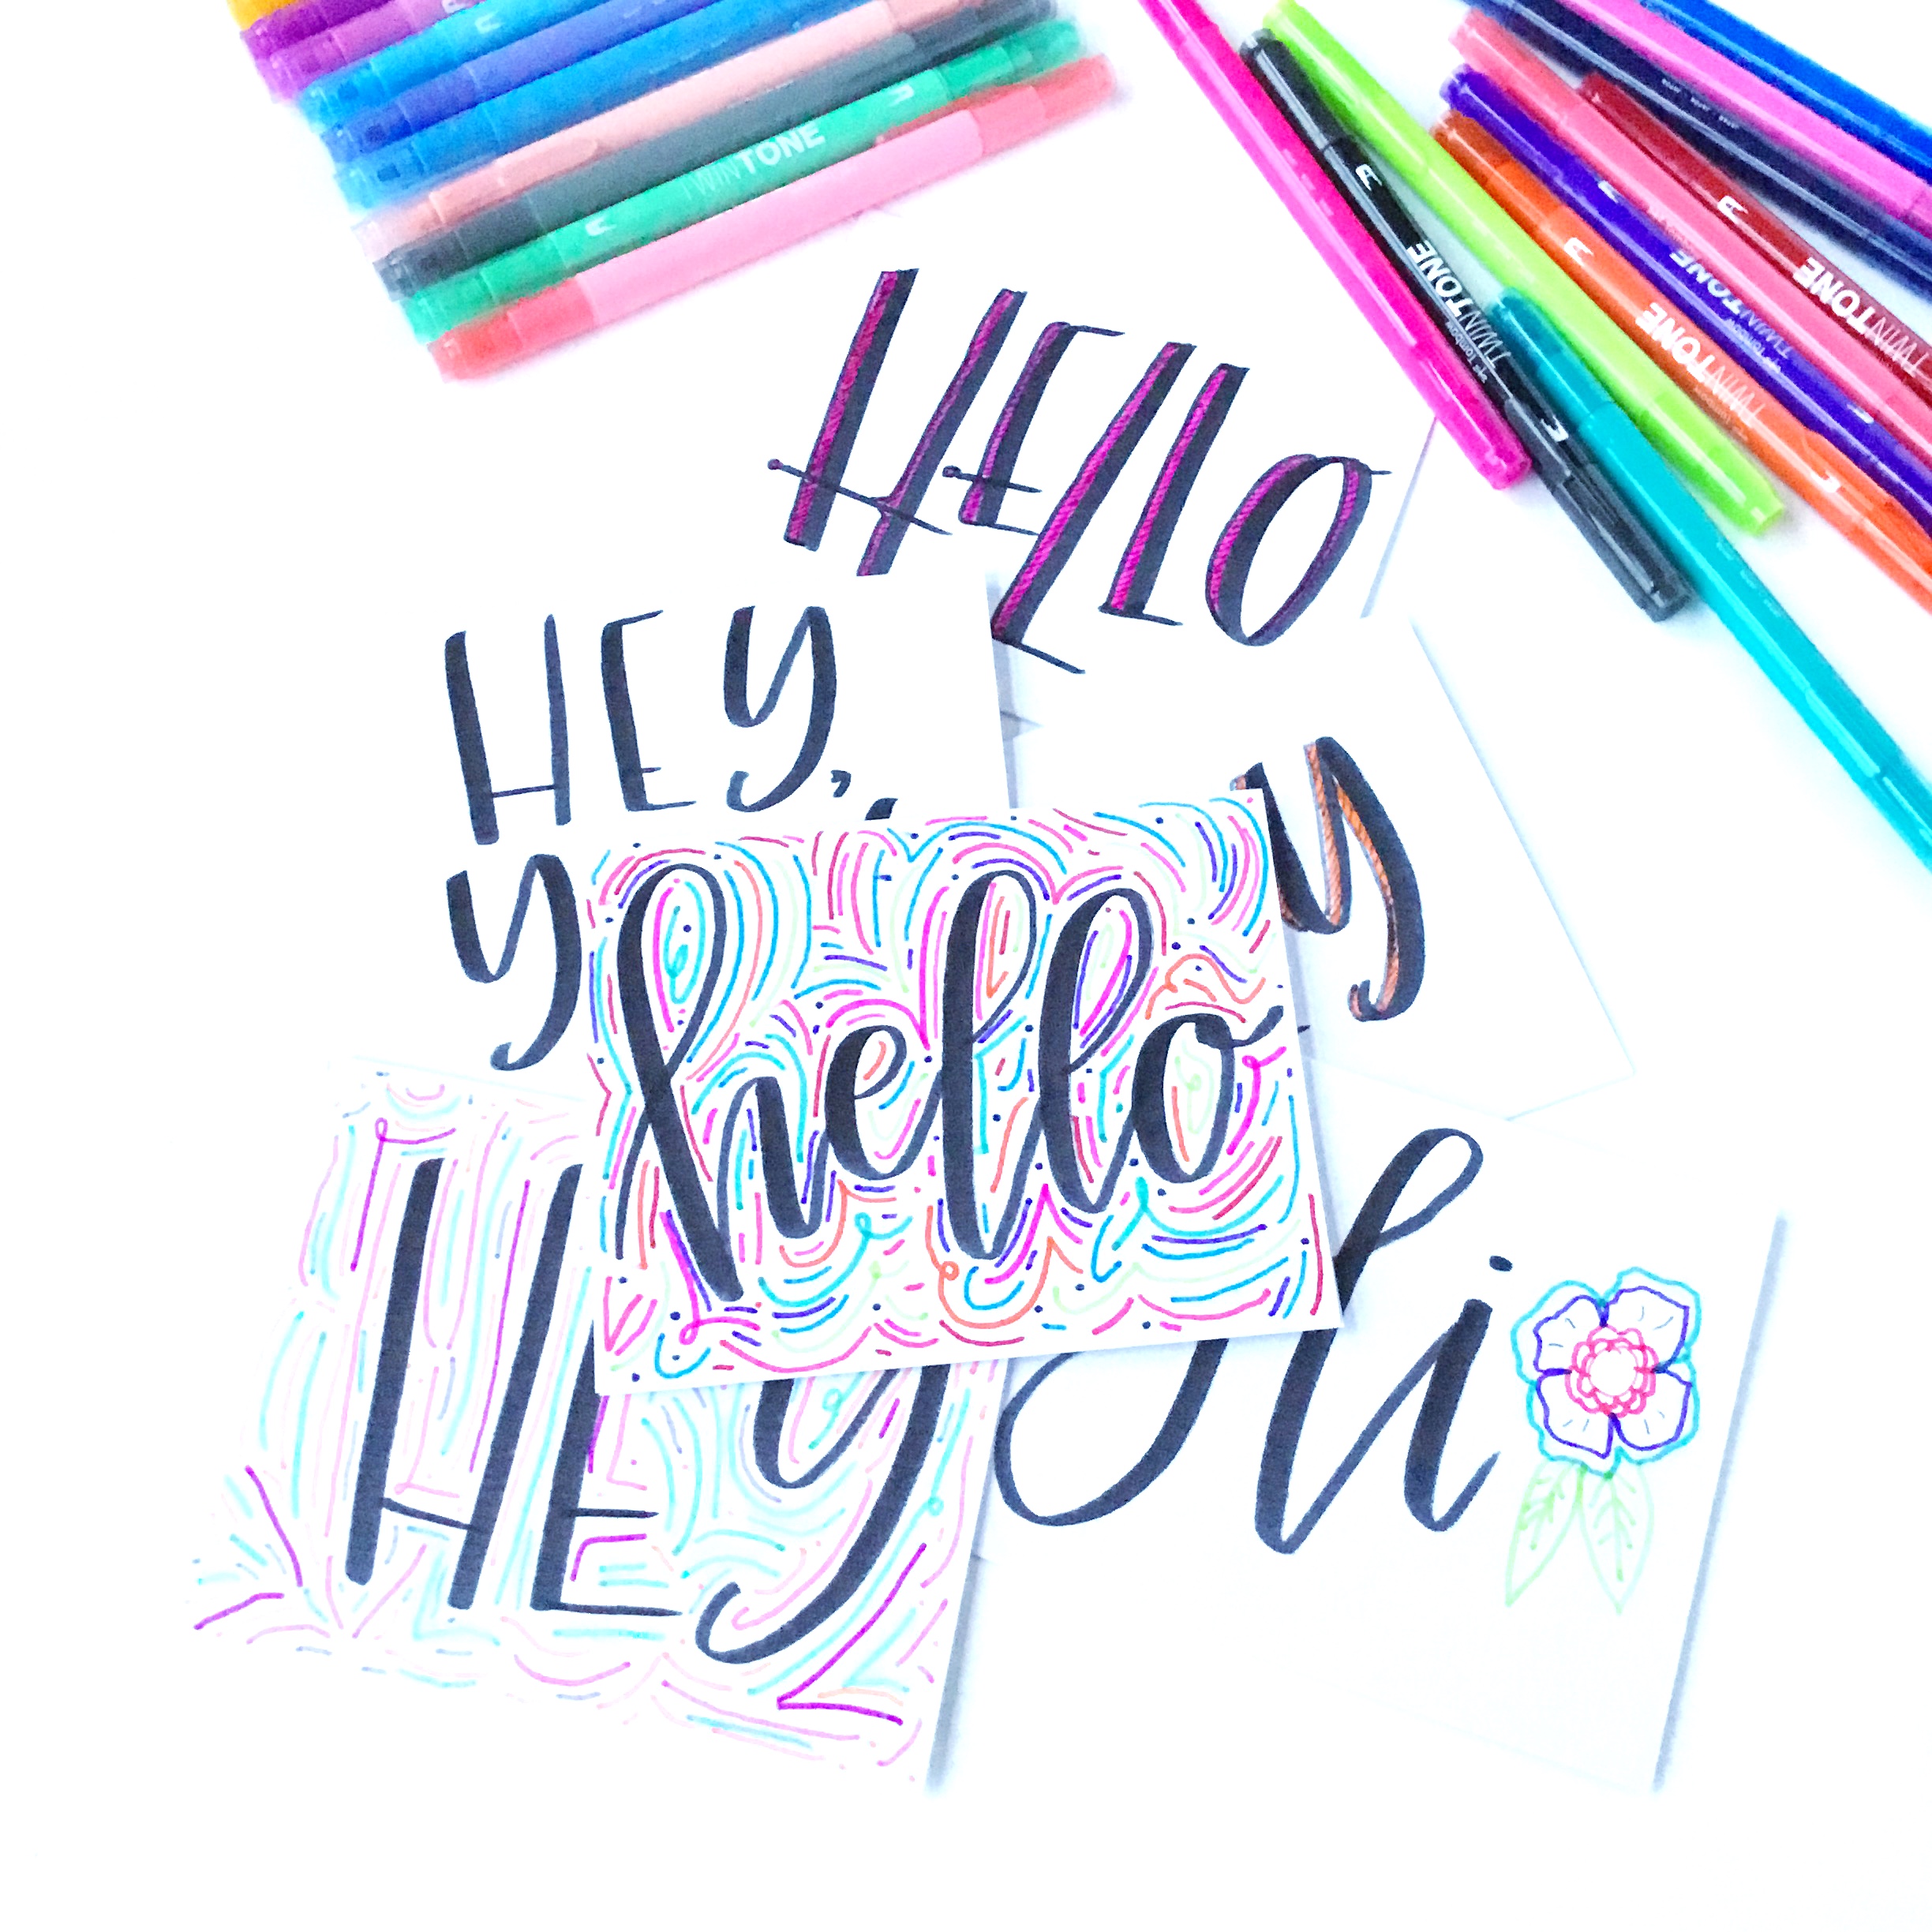 Learn how to embellish brush lettering with Tombow TwinTones from Lauren Fitzmaurice of @renmadecalligraphy on Instagram! For more lettering tips and tricks check out renmadecalligraphy.com or blog.tombowusa.com.